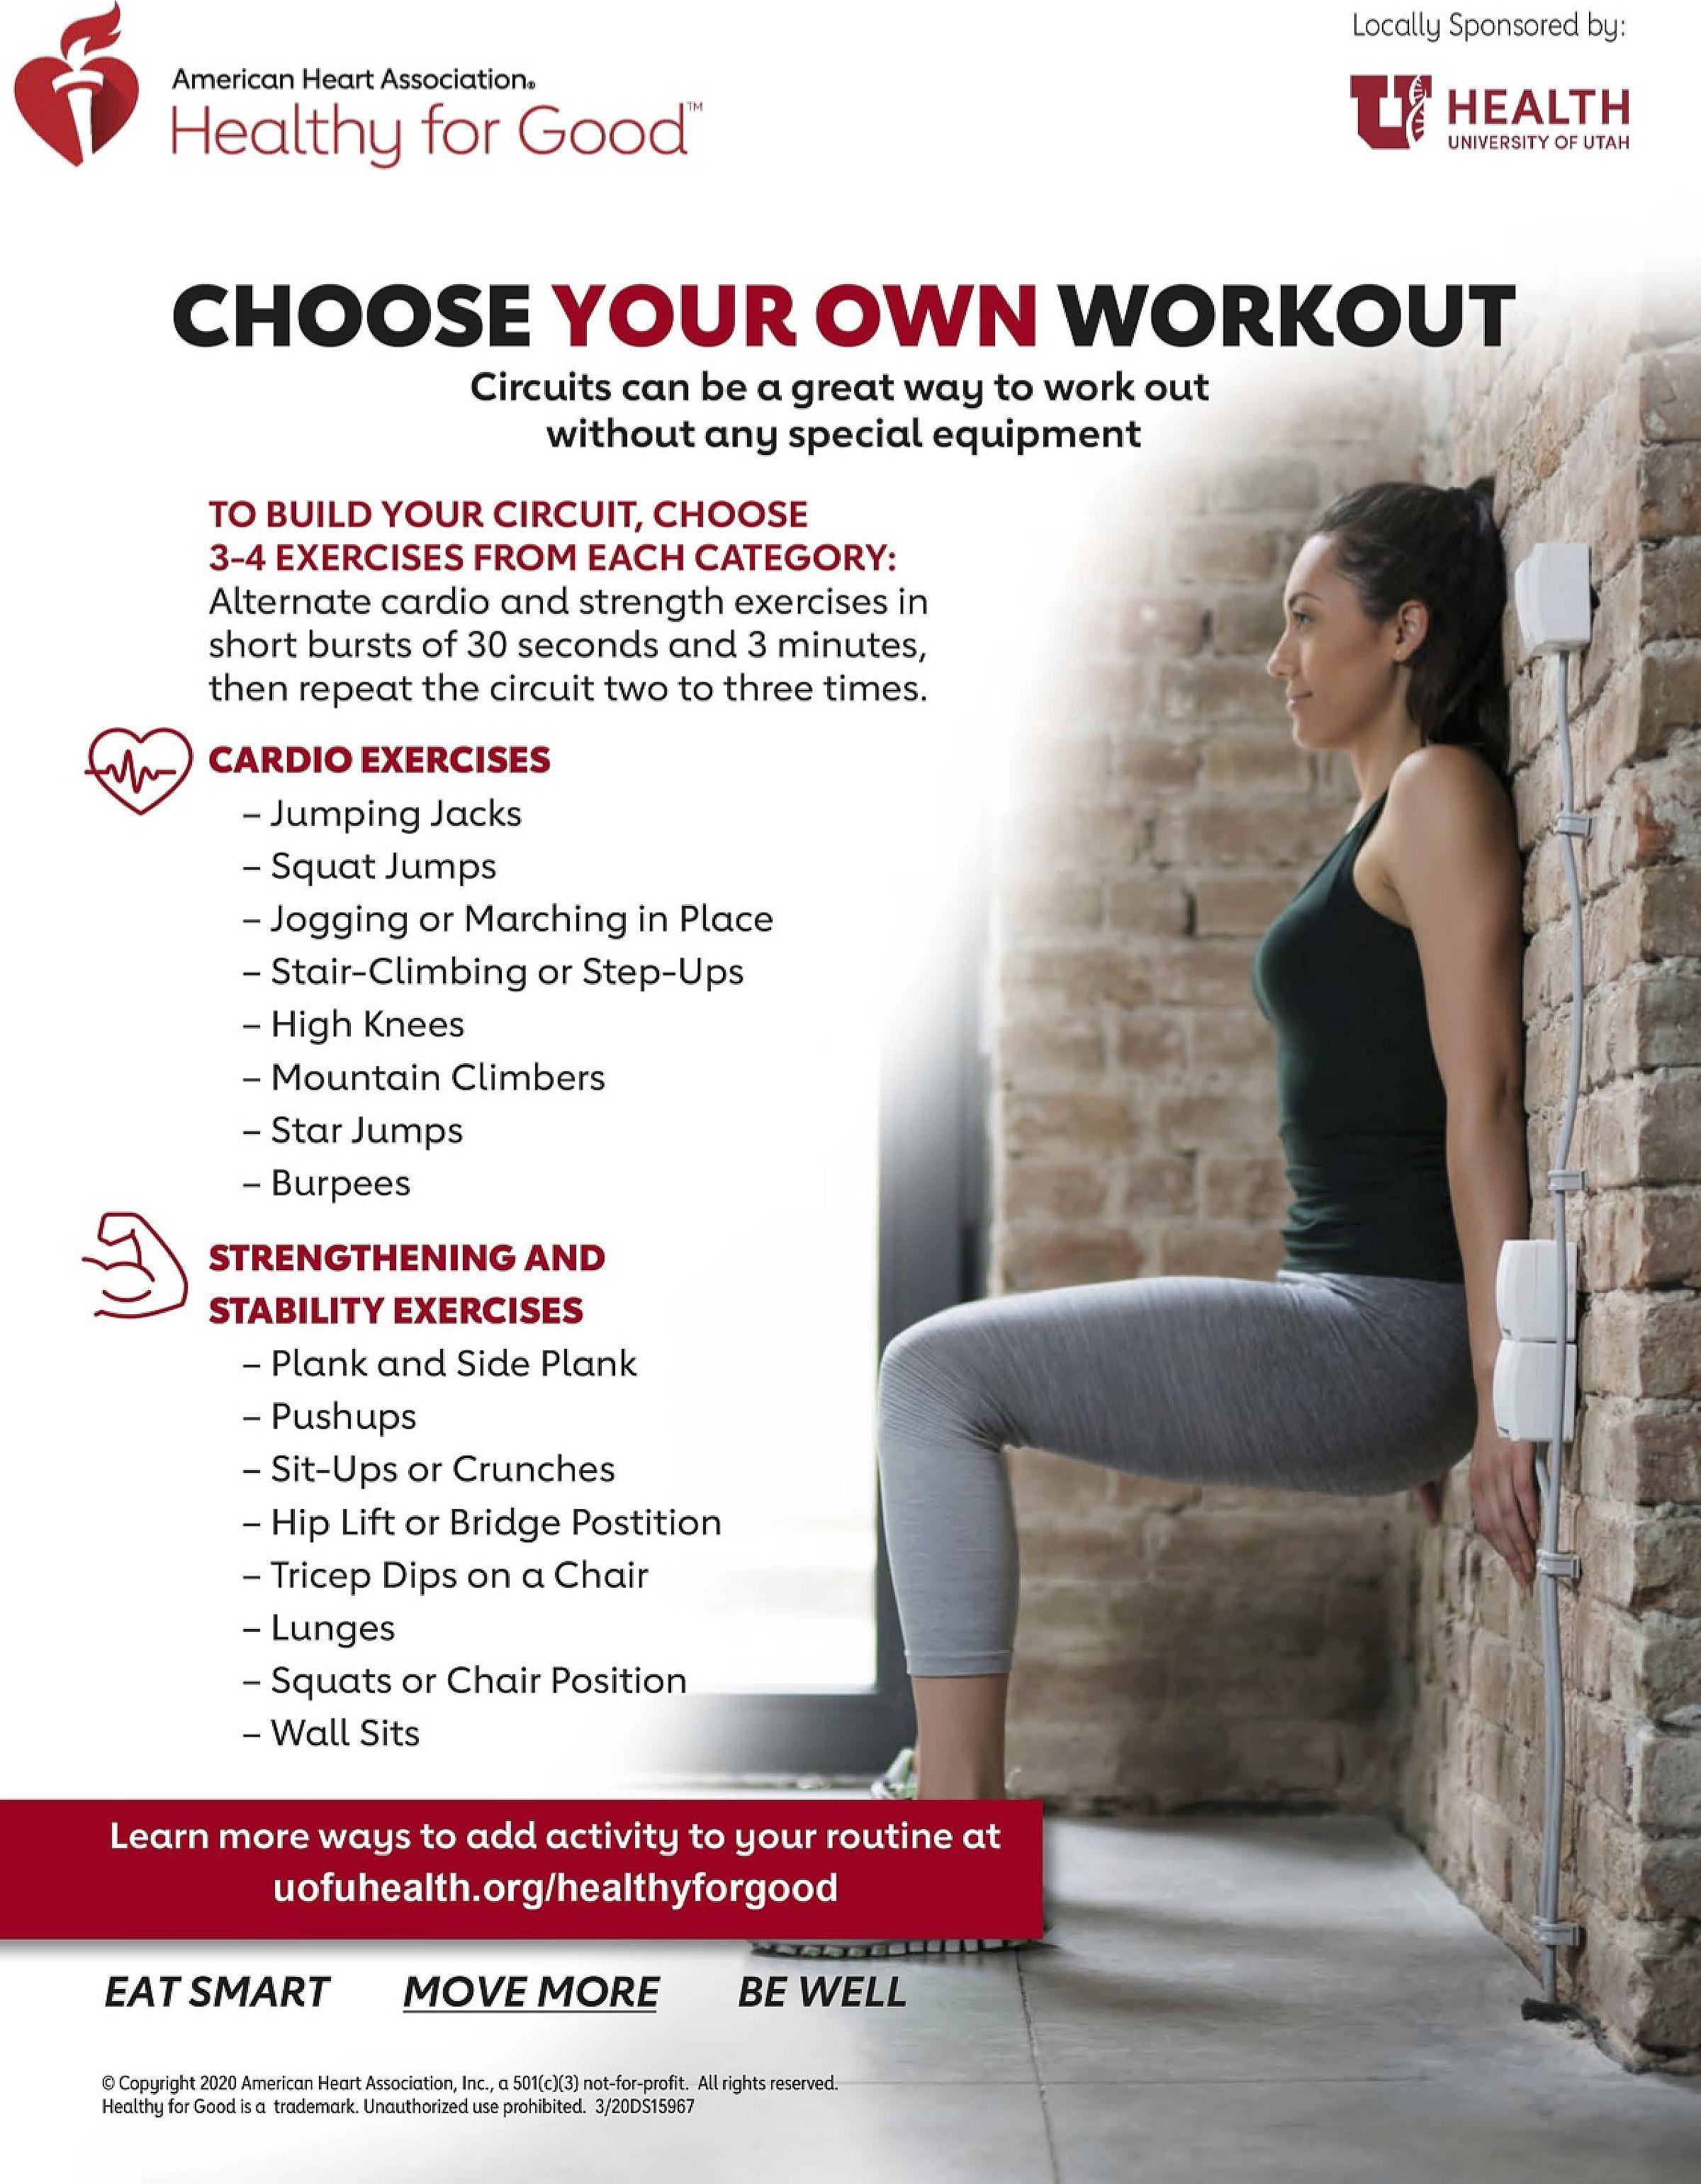 Choose your own workout infographic